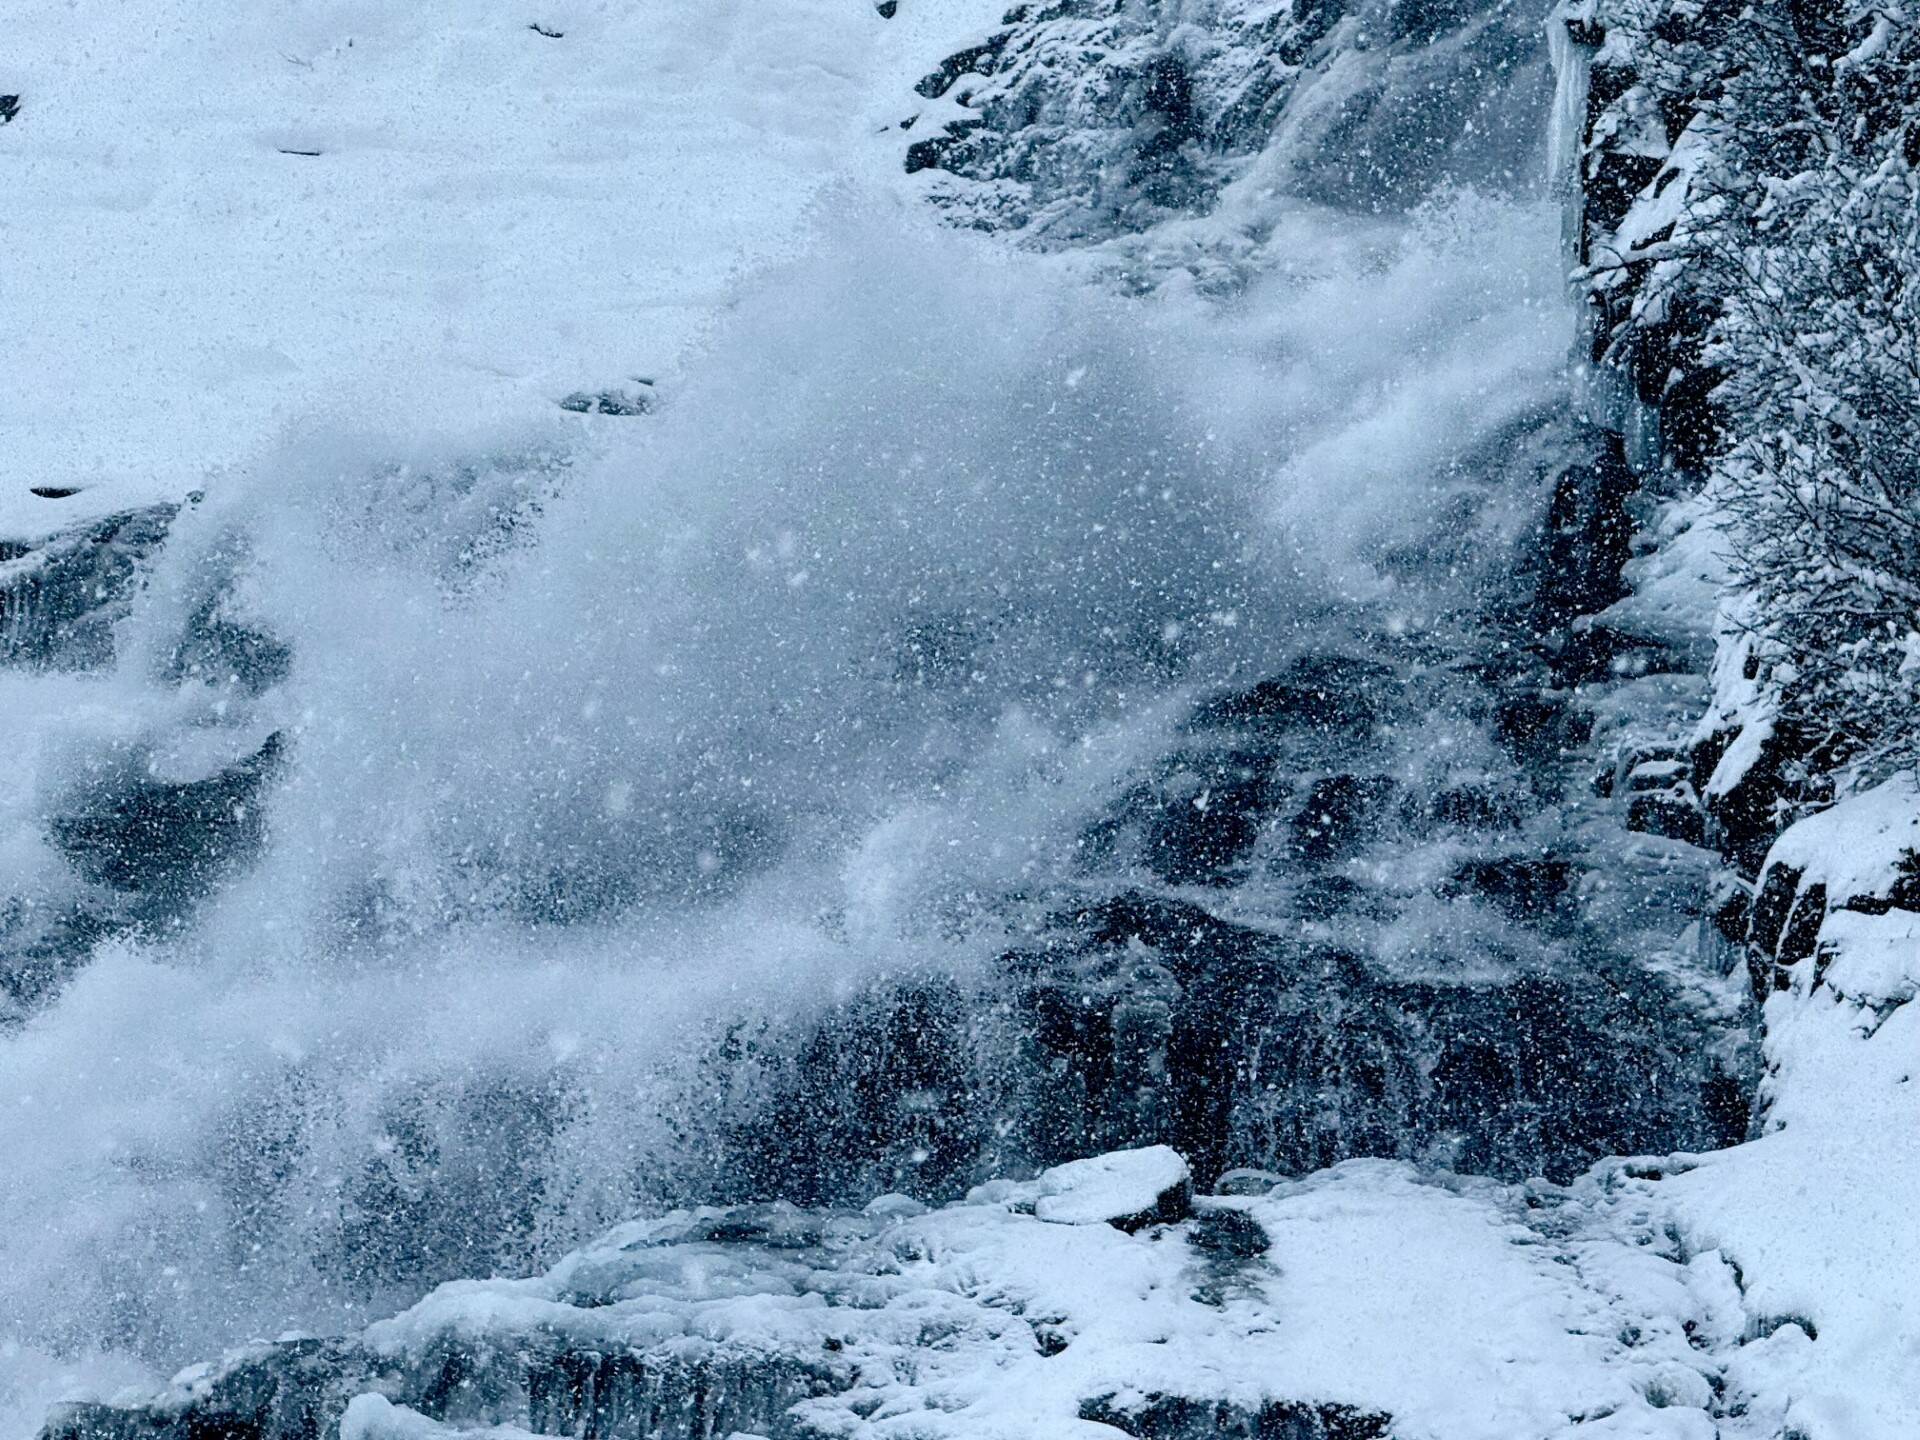 Water explodes over the top of Nugget Falls and cascades down to a pool below on Feb. 3. (Photo by Denise Carroll)